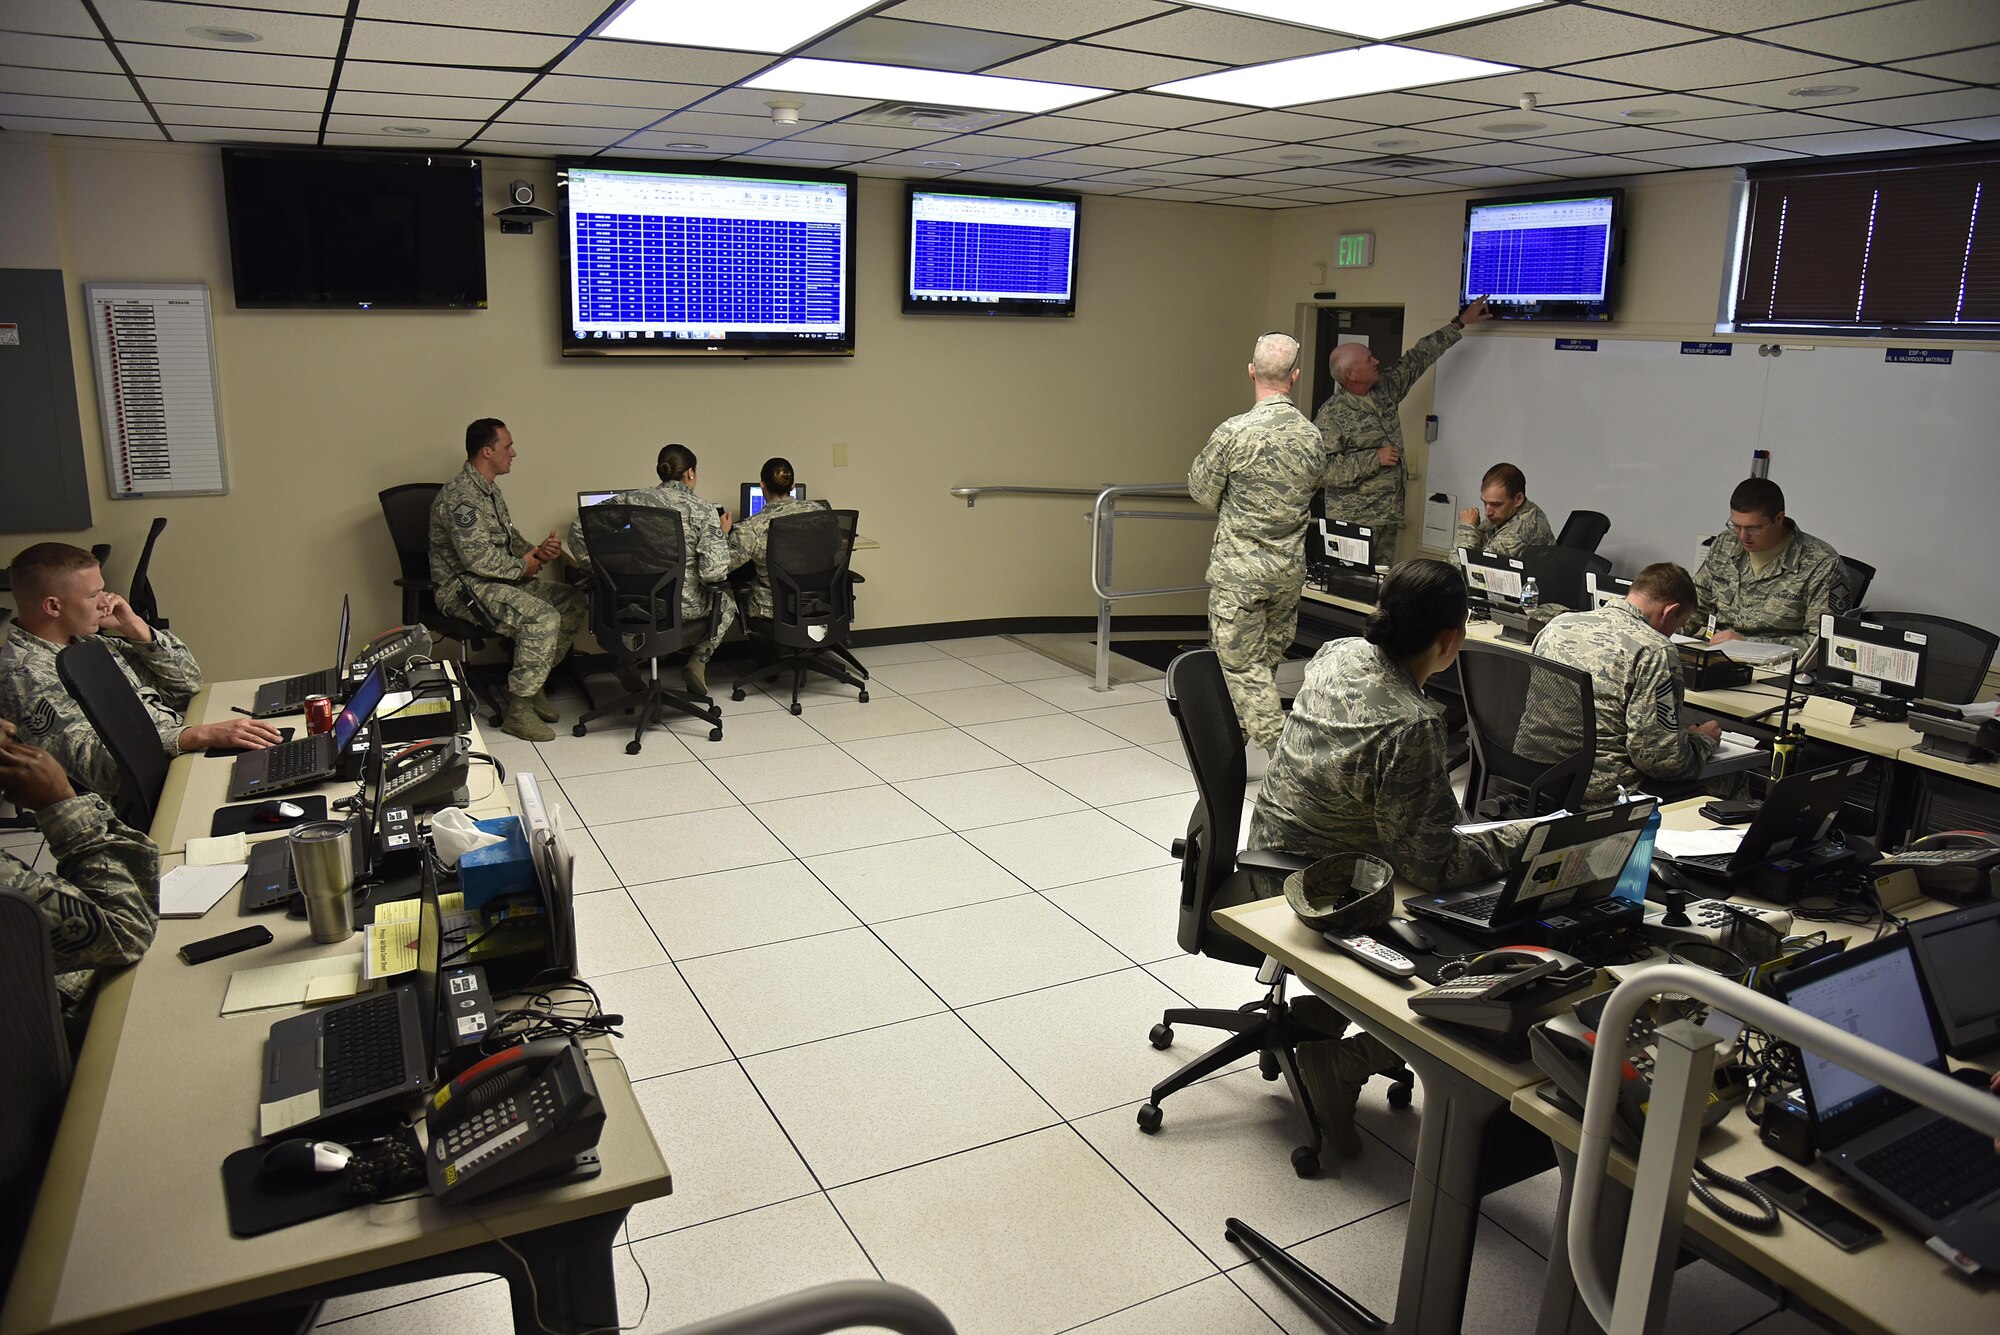 Service members work to take full accountability of 175th Wing Airmen June 22, 2017, in the emergency operations center at Warfield Air National Guard Base, Middle River, Md. The members were participating in Warfield’s first active shooter training exercise this year. (U.S. Air National Guard photo by Airman Sarah M. McClanahan)